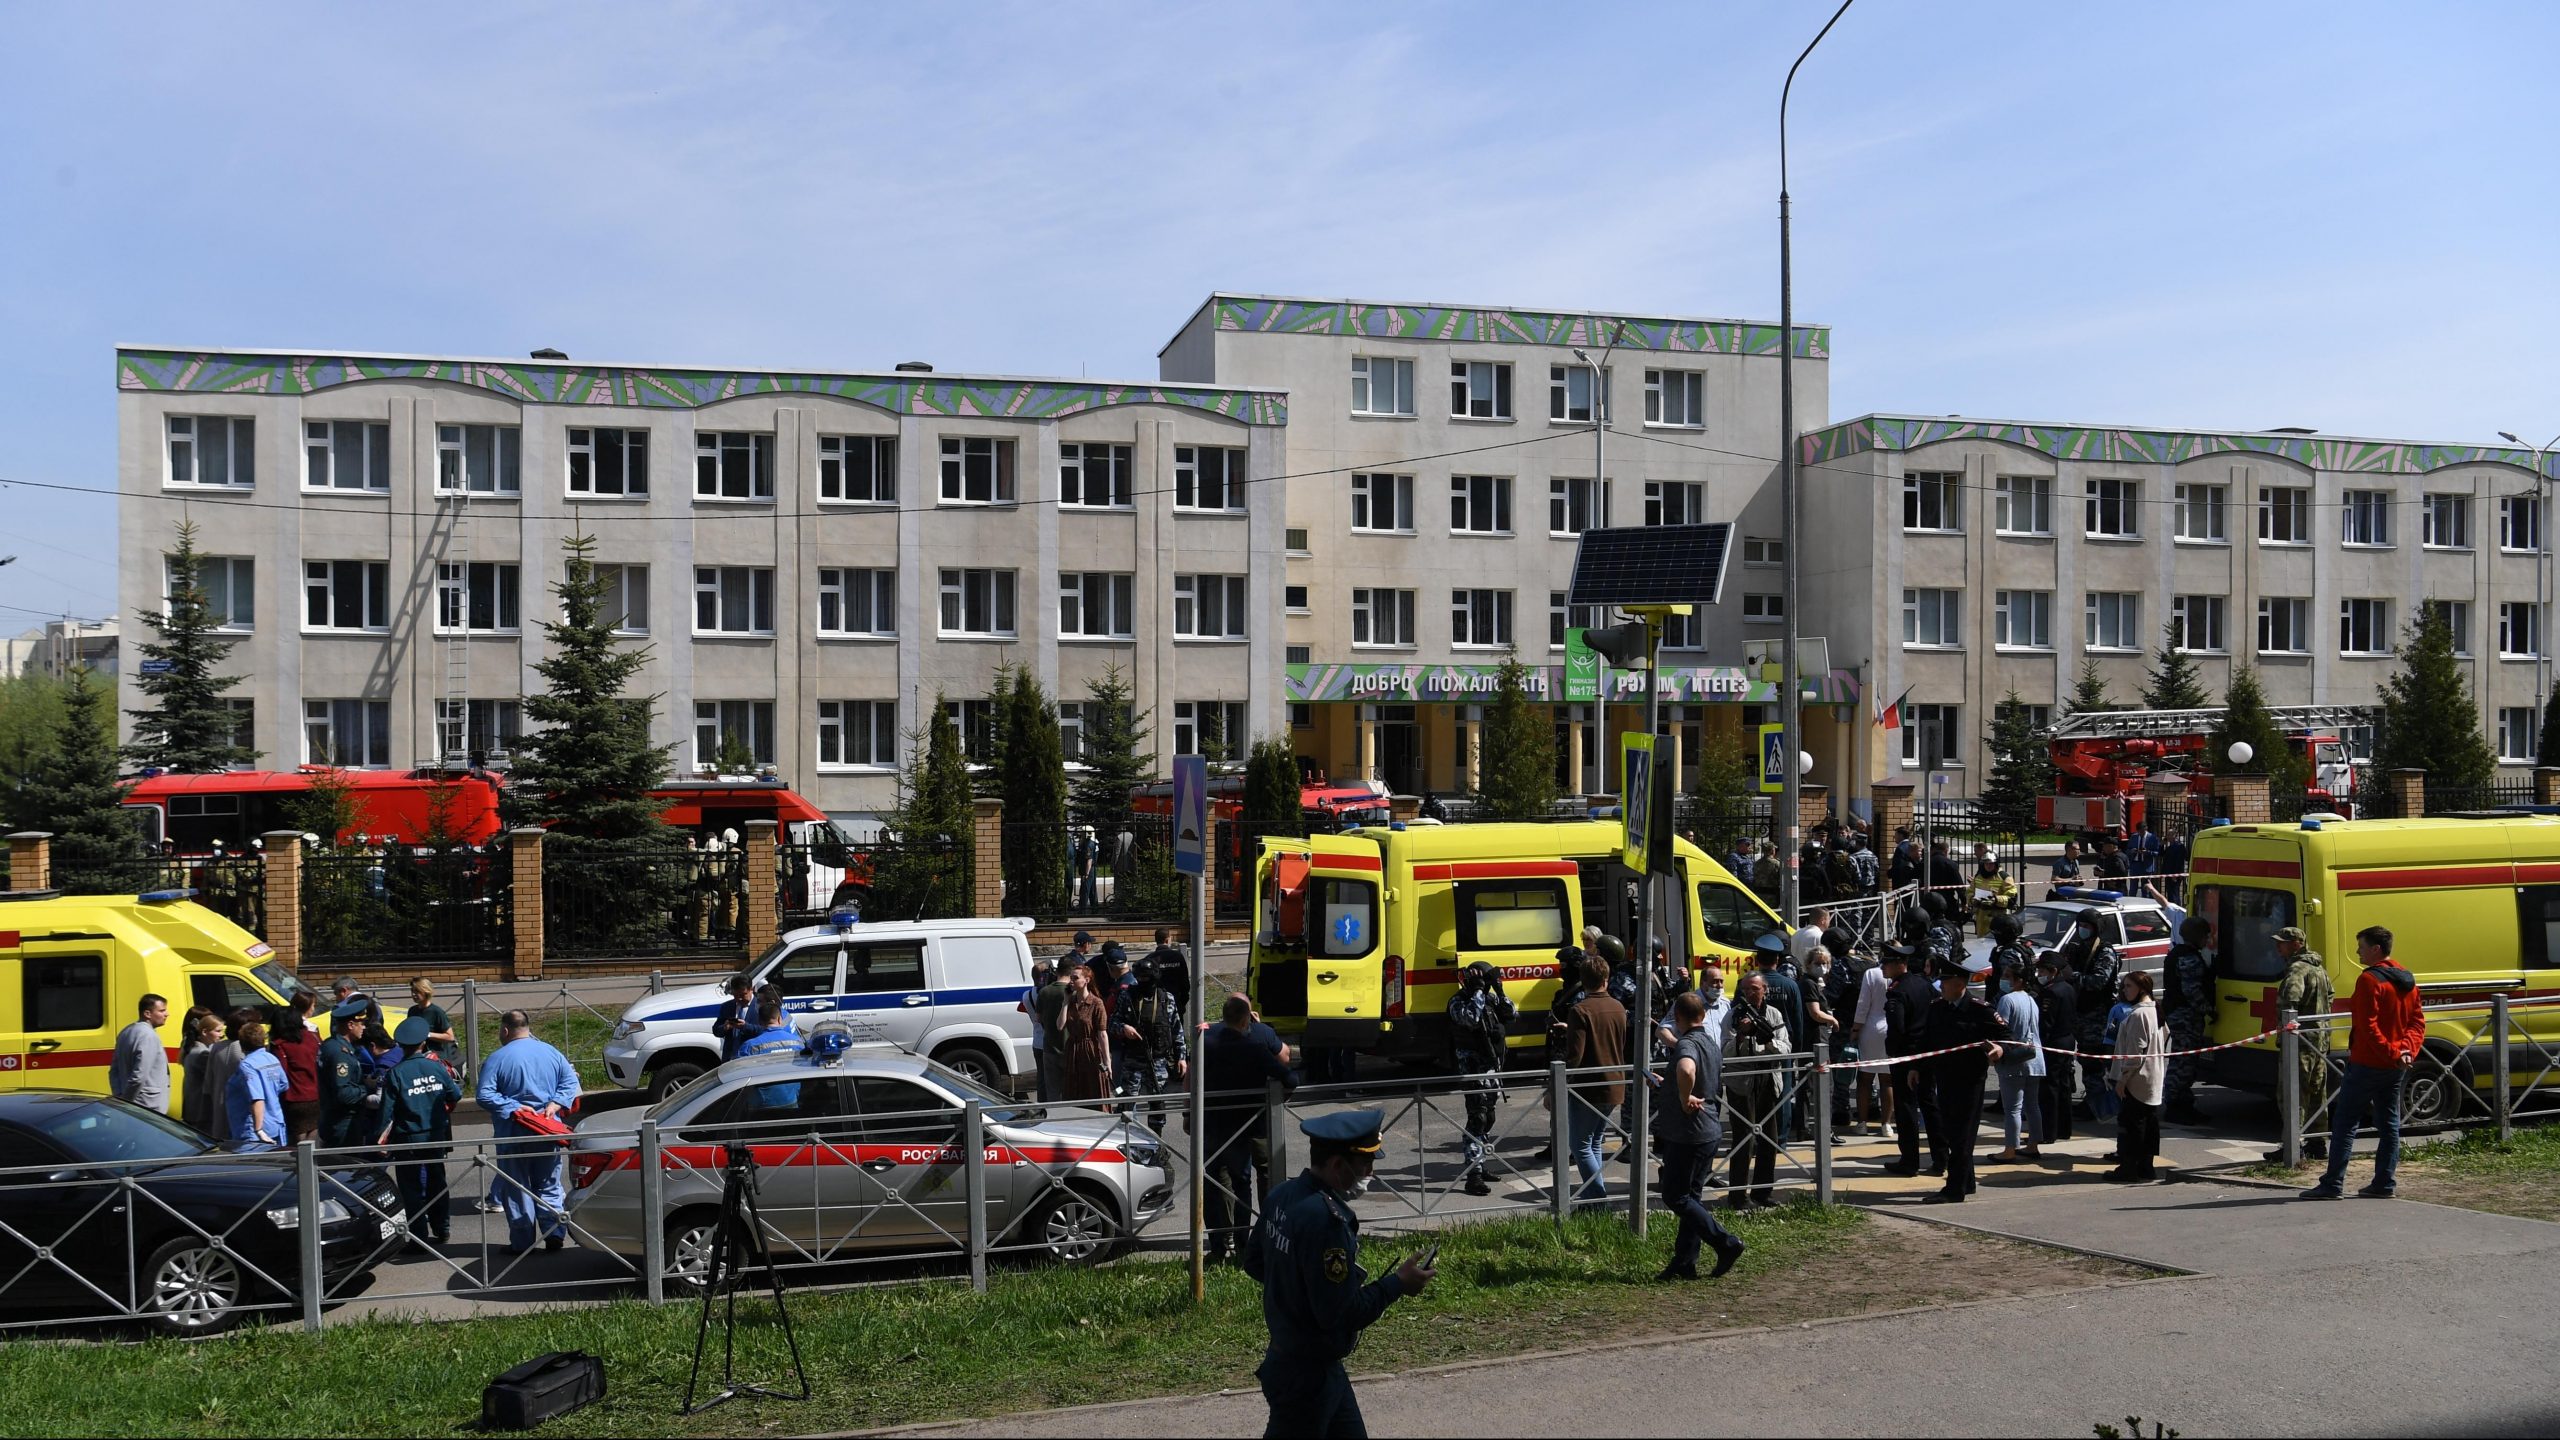 A shooting attack at a school in Kazan, killing at least eight students and a teacher